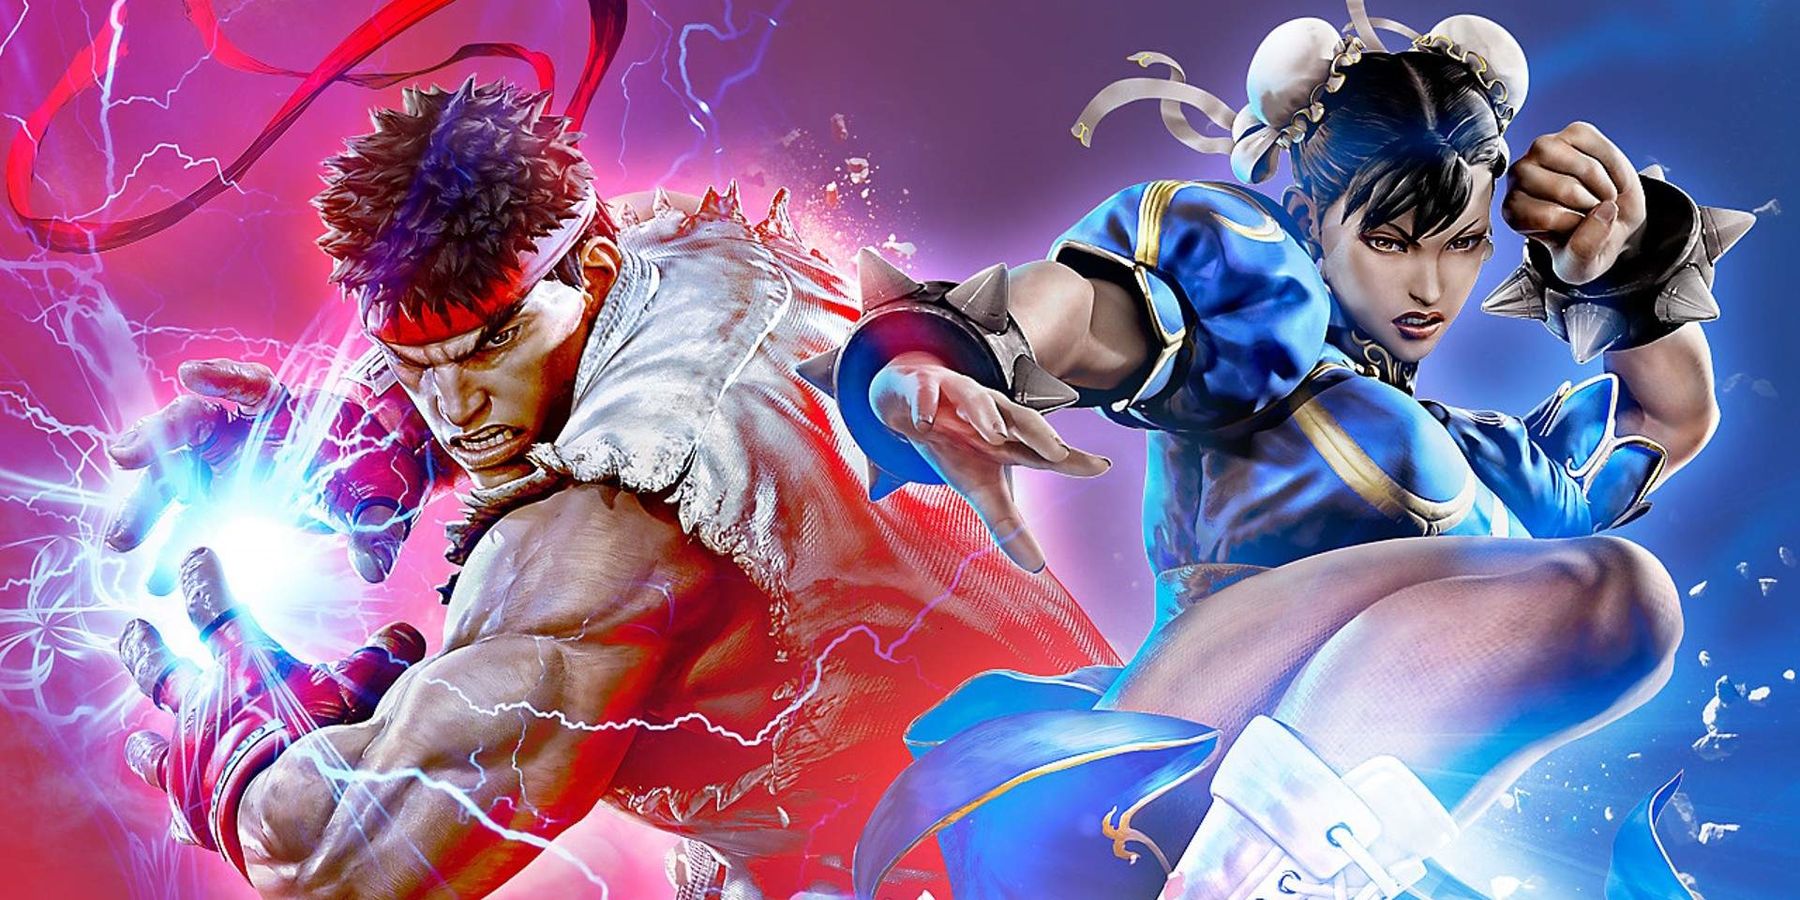 Street Fighter 6 Fighters Chun Li and Ryu doing their special moves